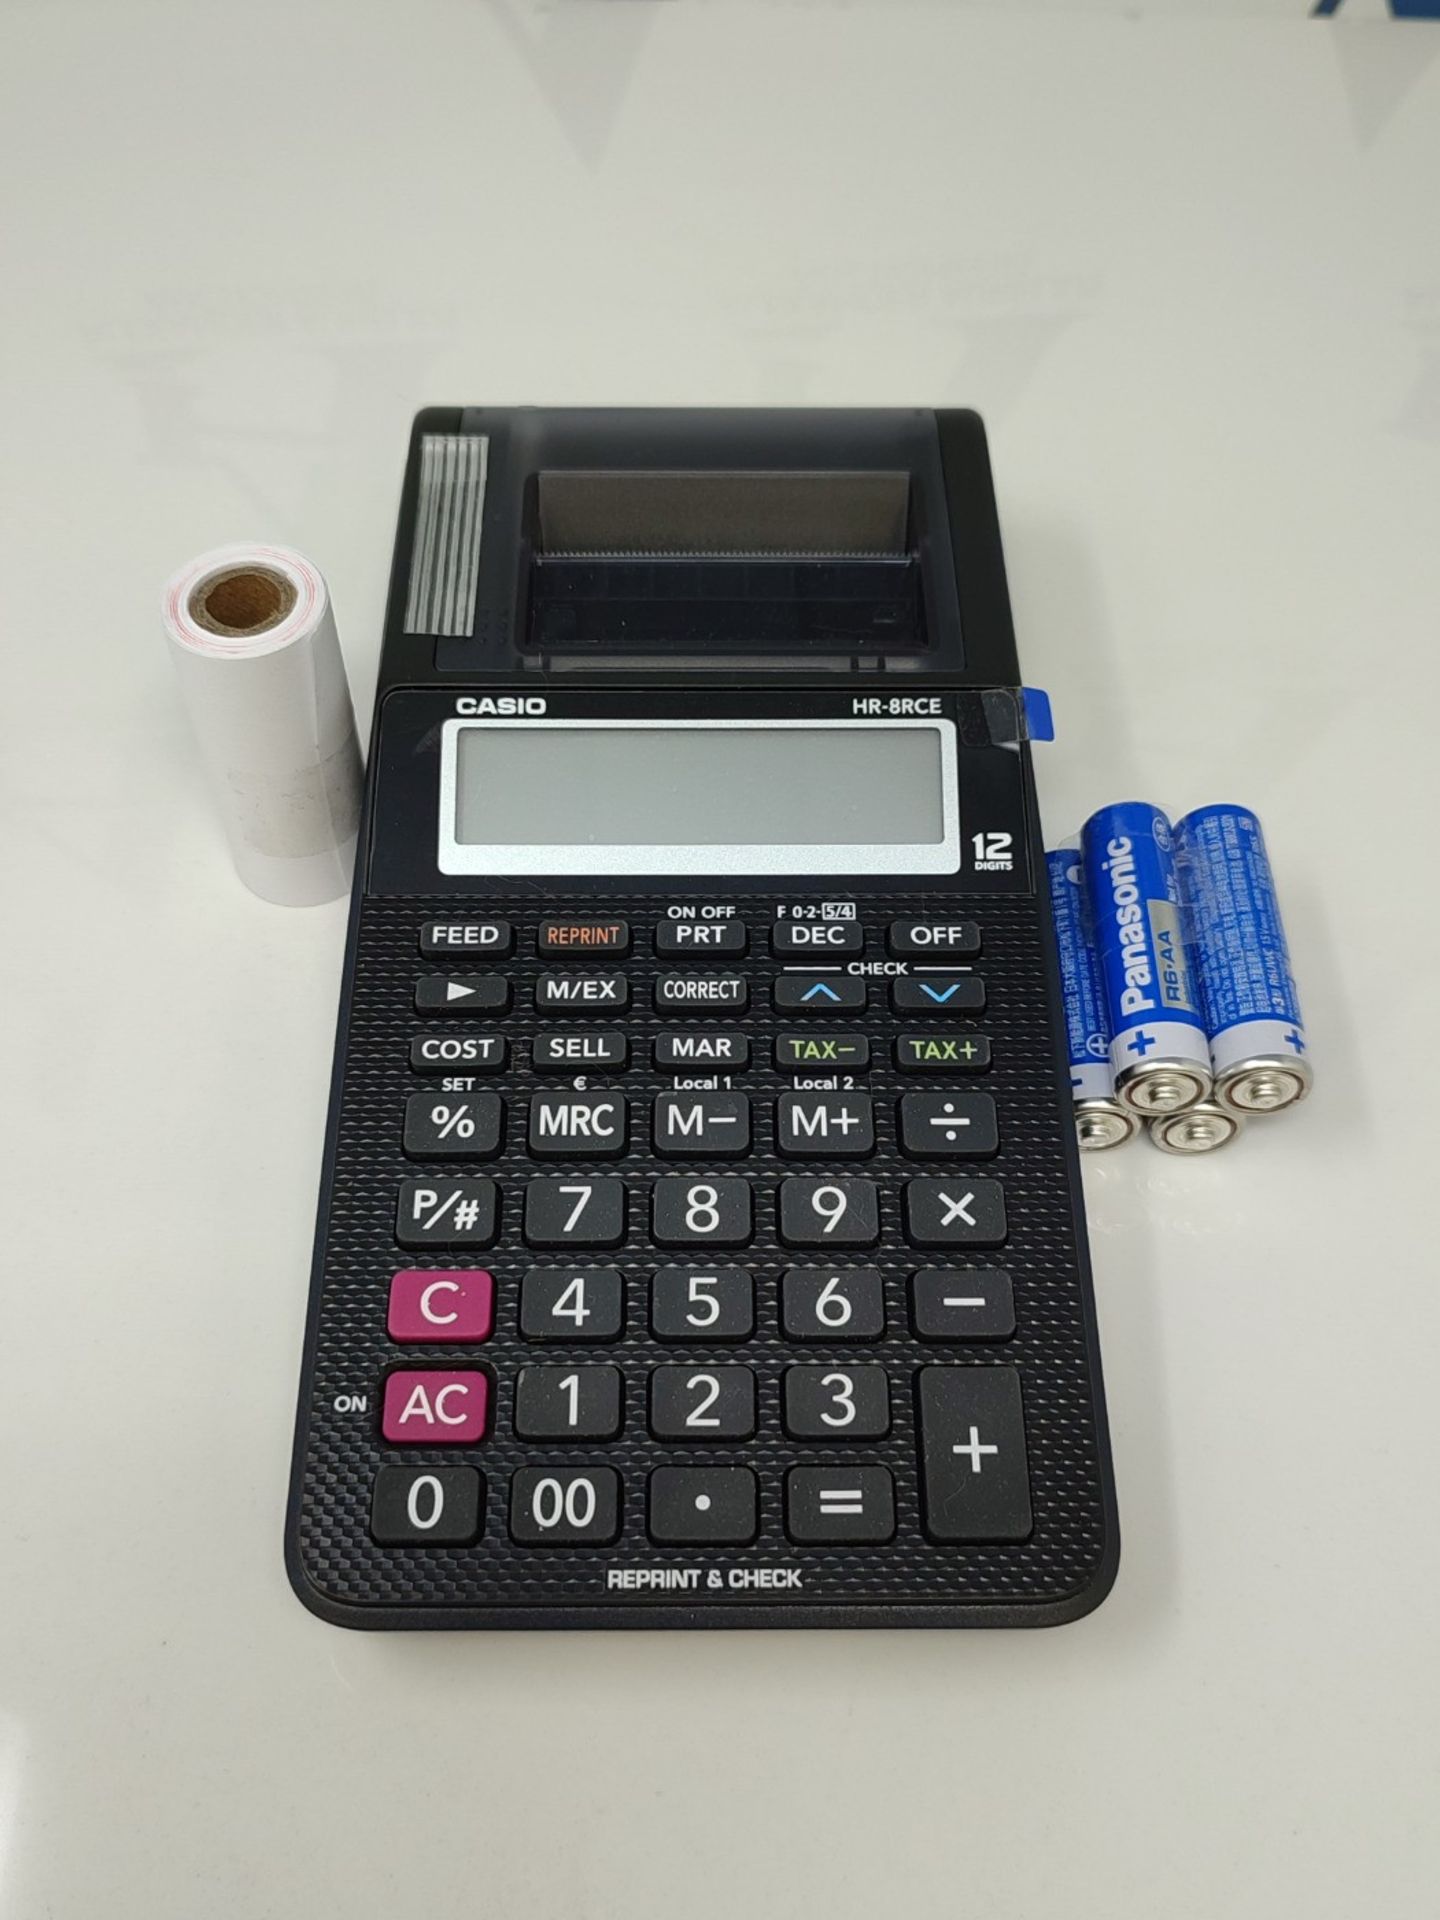 Casio HR-8RCE-BK Portable Printing Calculator, 12-Digit Display, Check and Correct Fun - Image 3 of 3